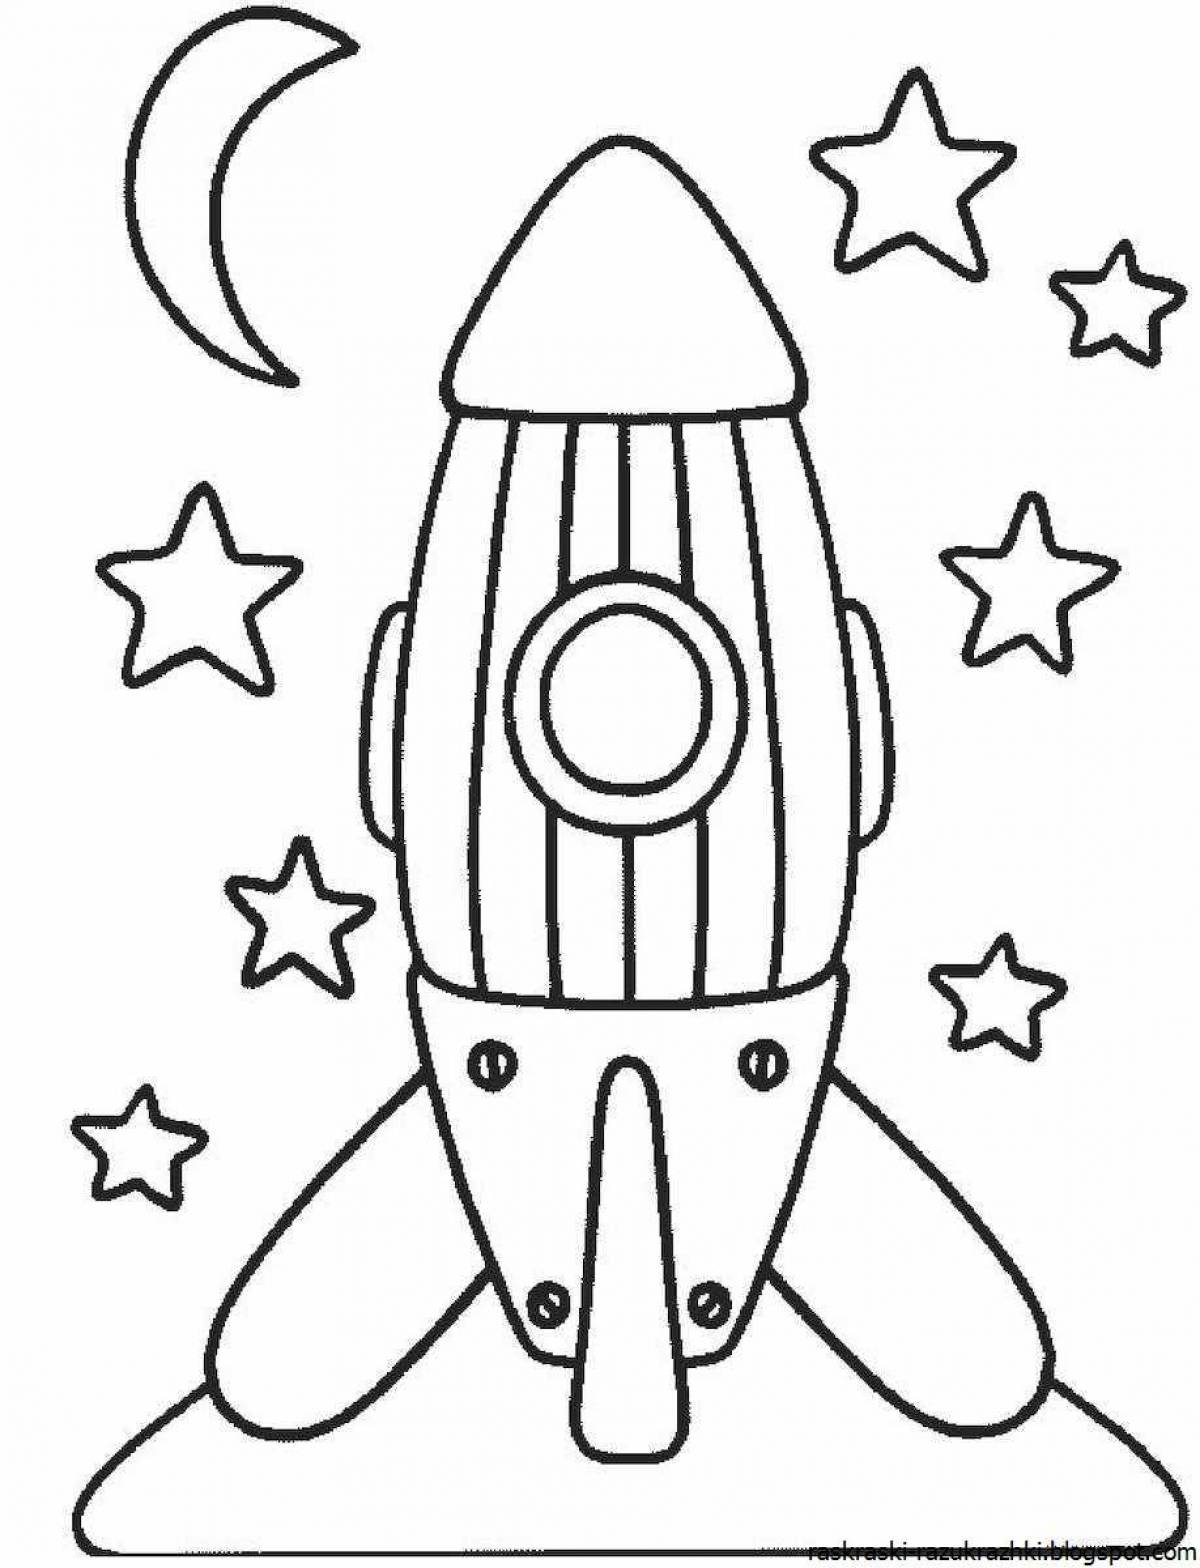 Exquisite rocket coloring book for kids